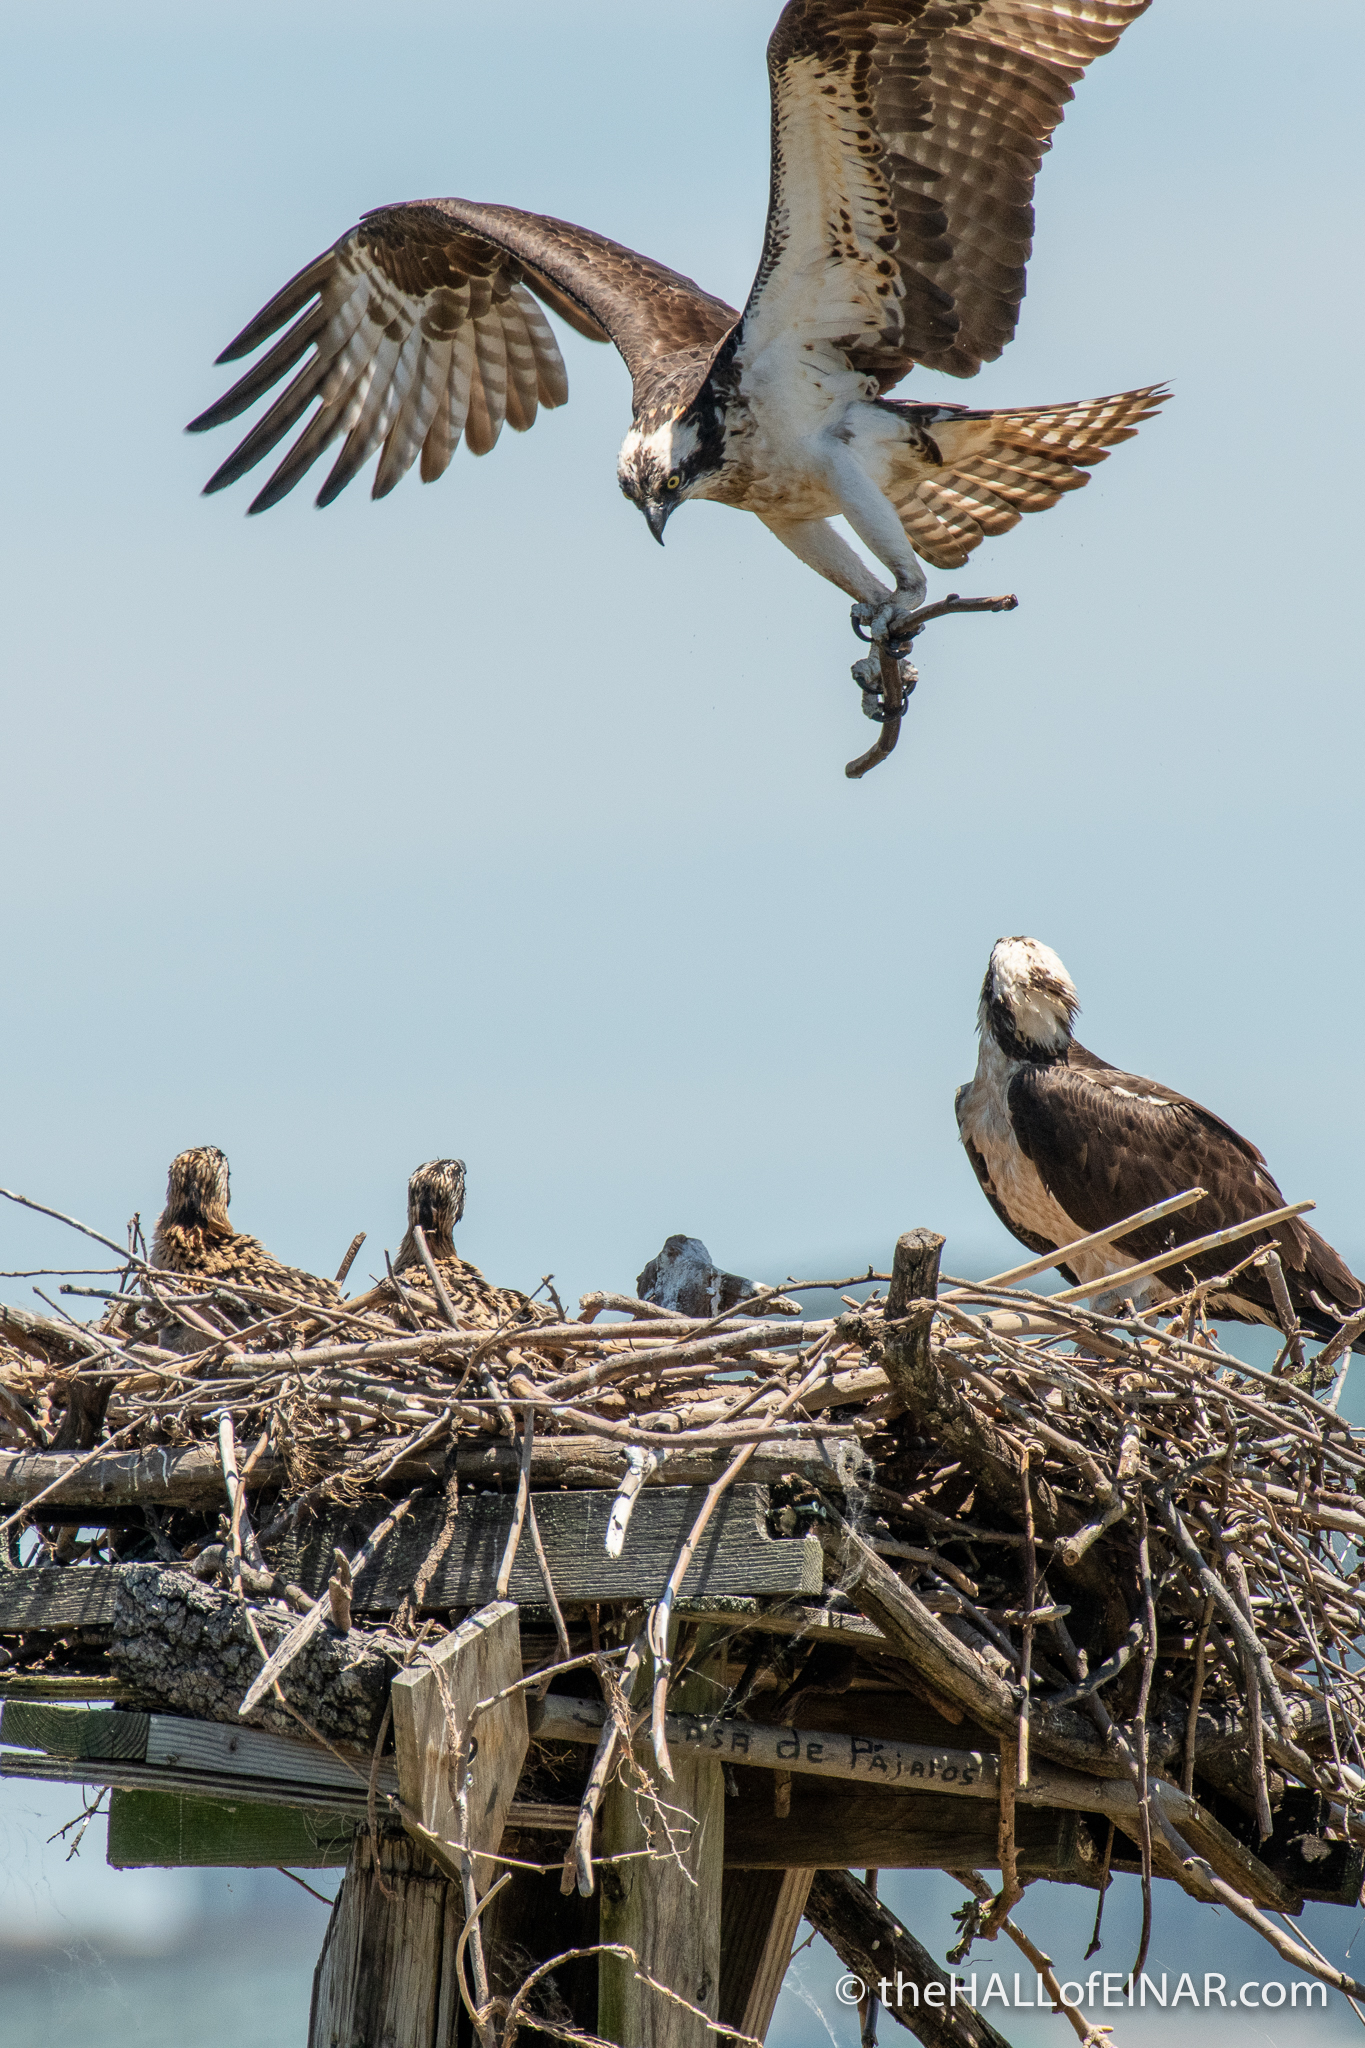 Osprey nest at Belle Haven Marina - The Hall of Einar - photograph (c) David Bailey (not the)